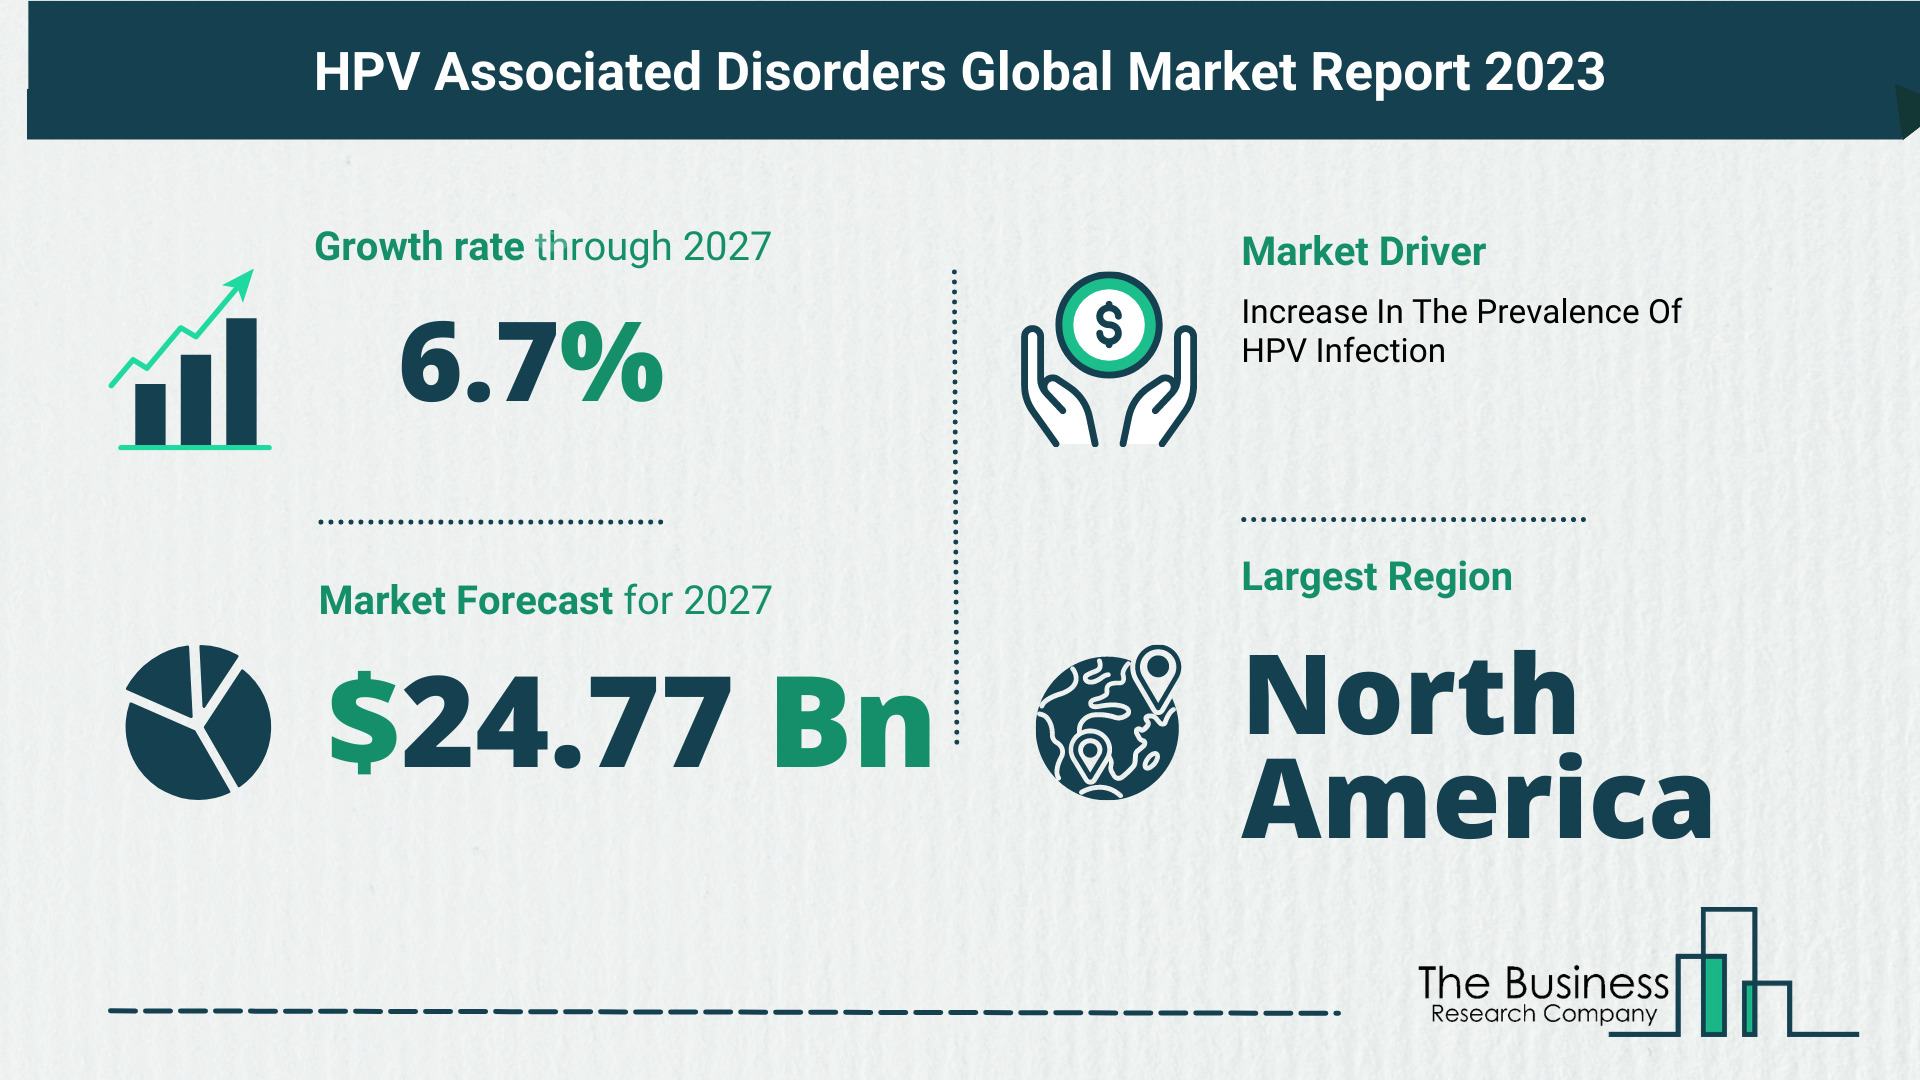 5 Key Insights Into the HPV Associated Disorders Market in 2023